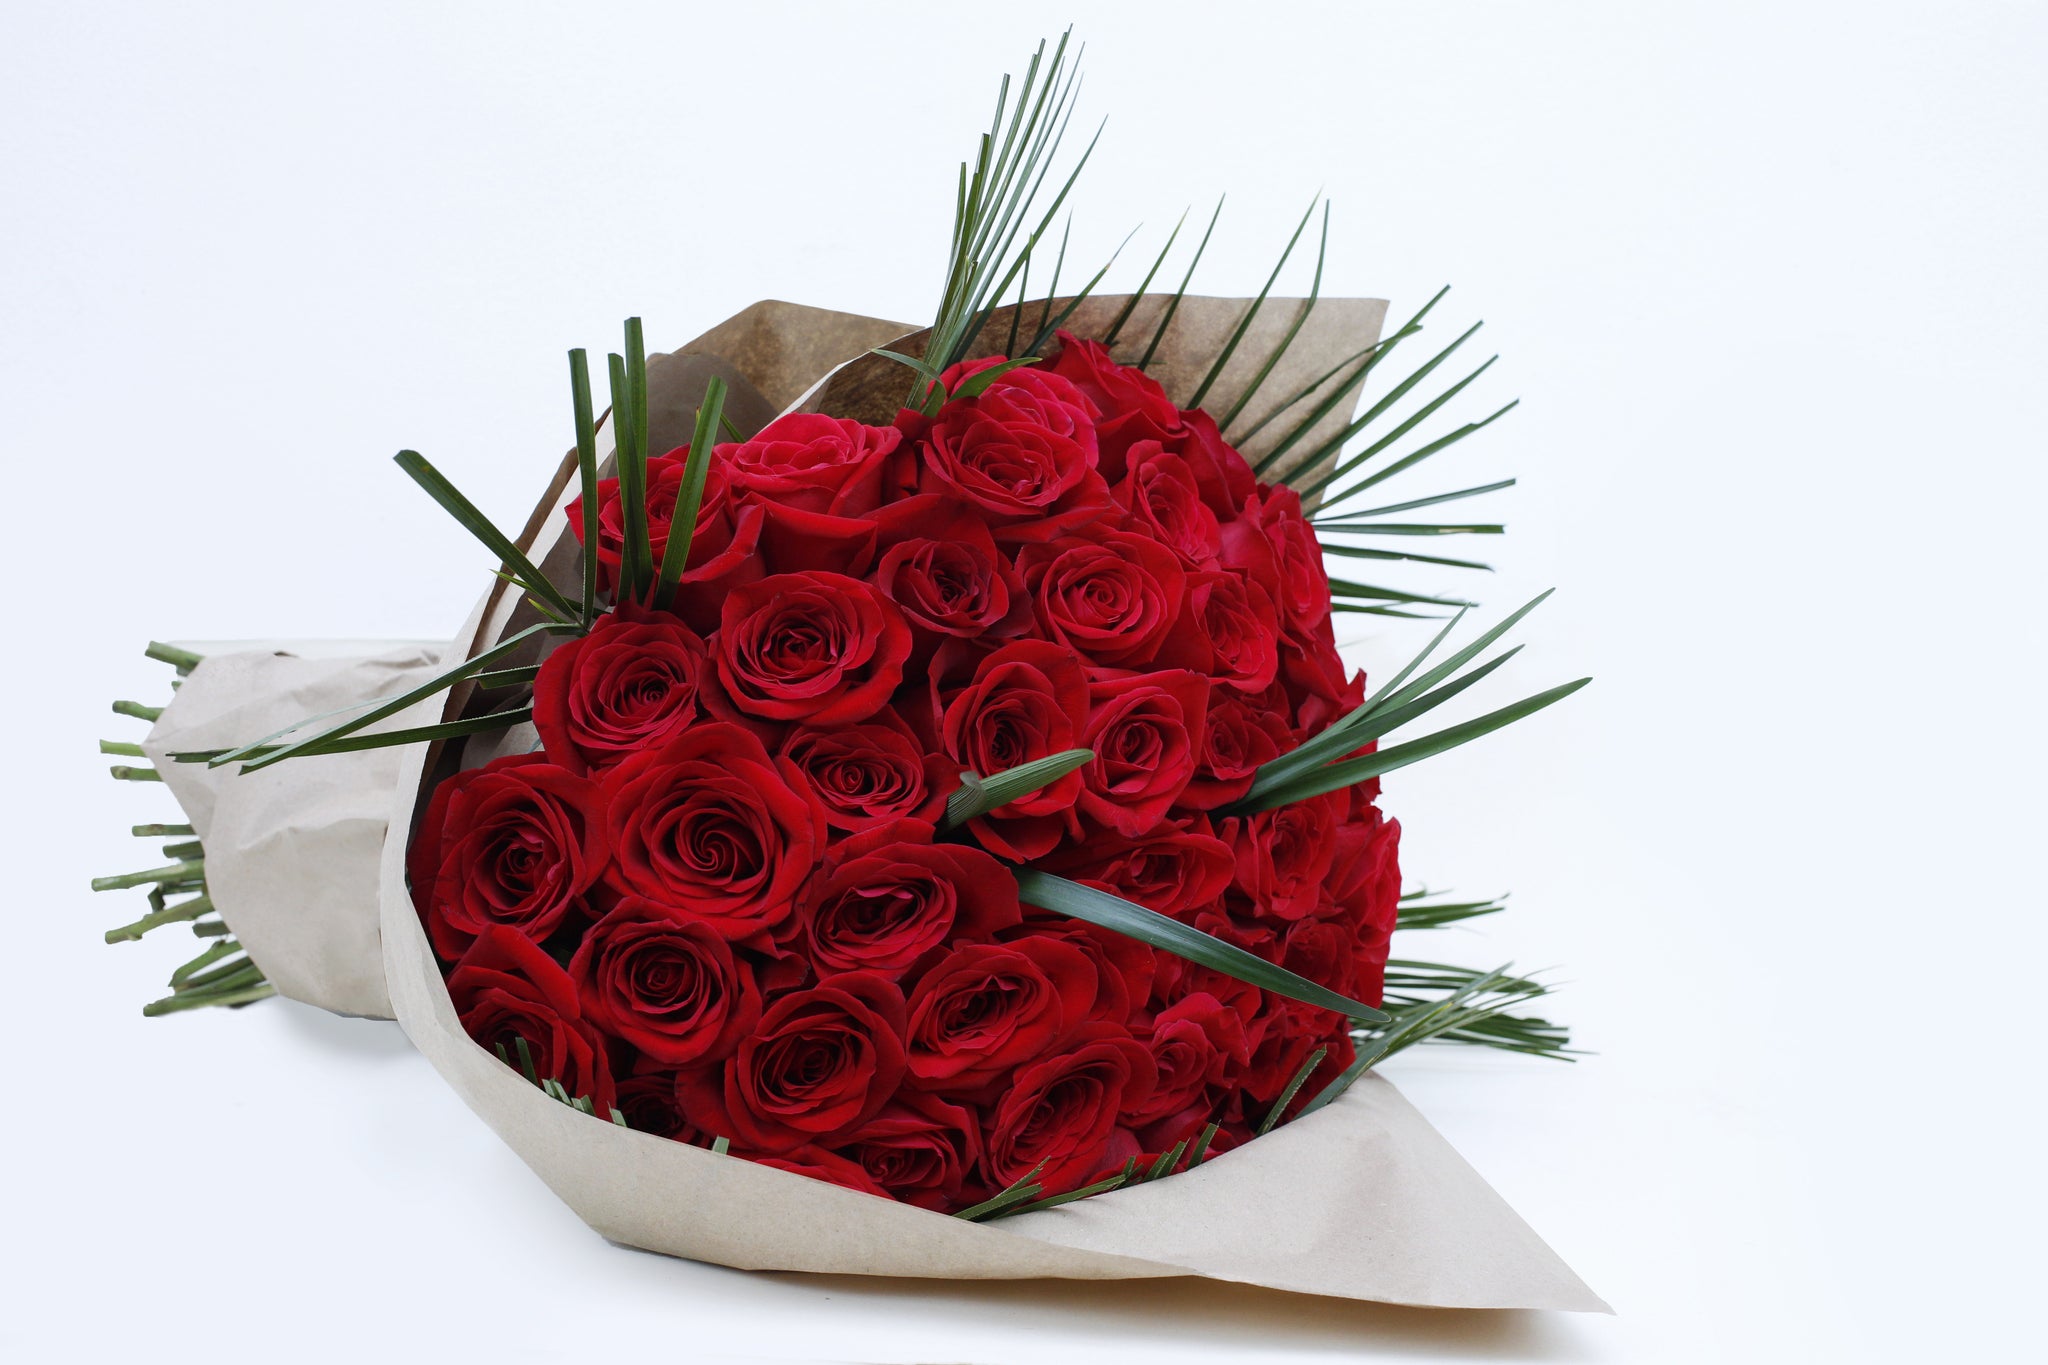 Unforgettable 50 Rose Hand-tied Side - red roses , palm leaves , steel grass, bouquet. Side shot of 50 red roses hand tied.